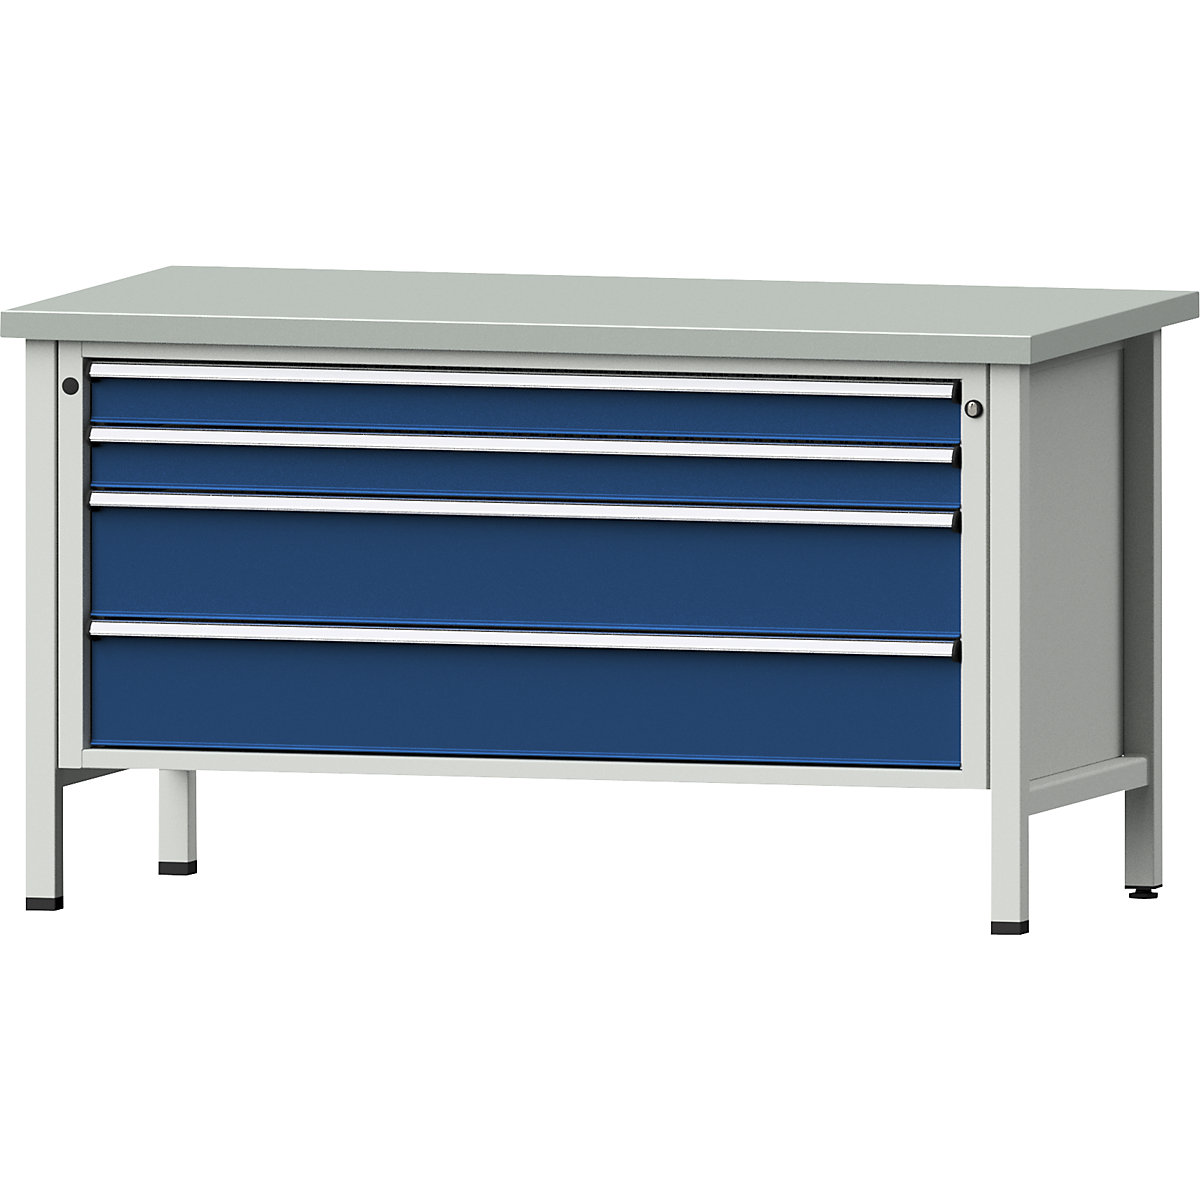 Workbench with XL/XXL drawers, frame construction – ANKE, width 1500 mm, 4 drawers, sheet steel covered worktop, front in gentian blue-11